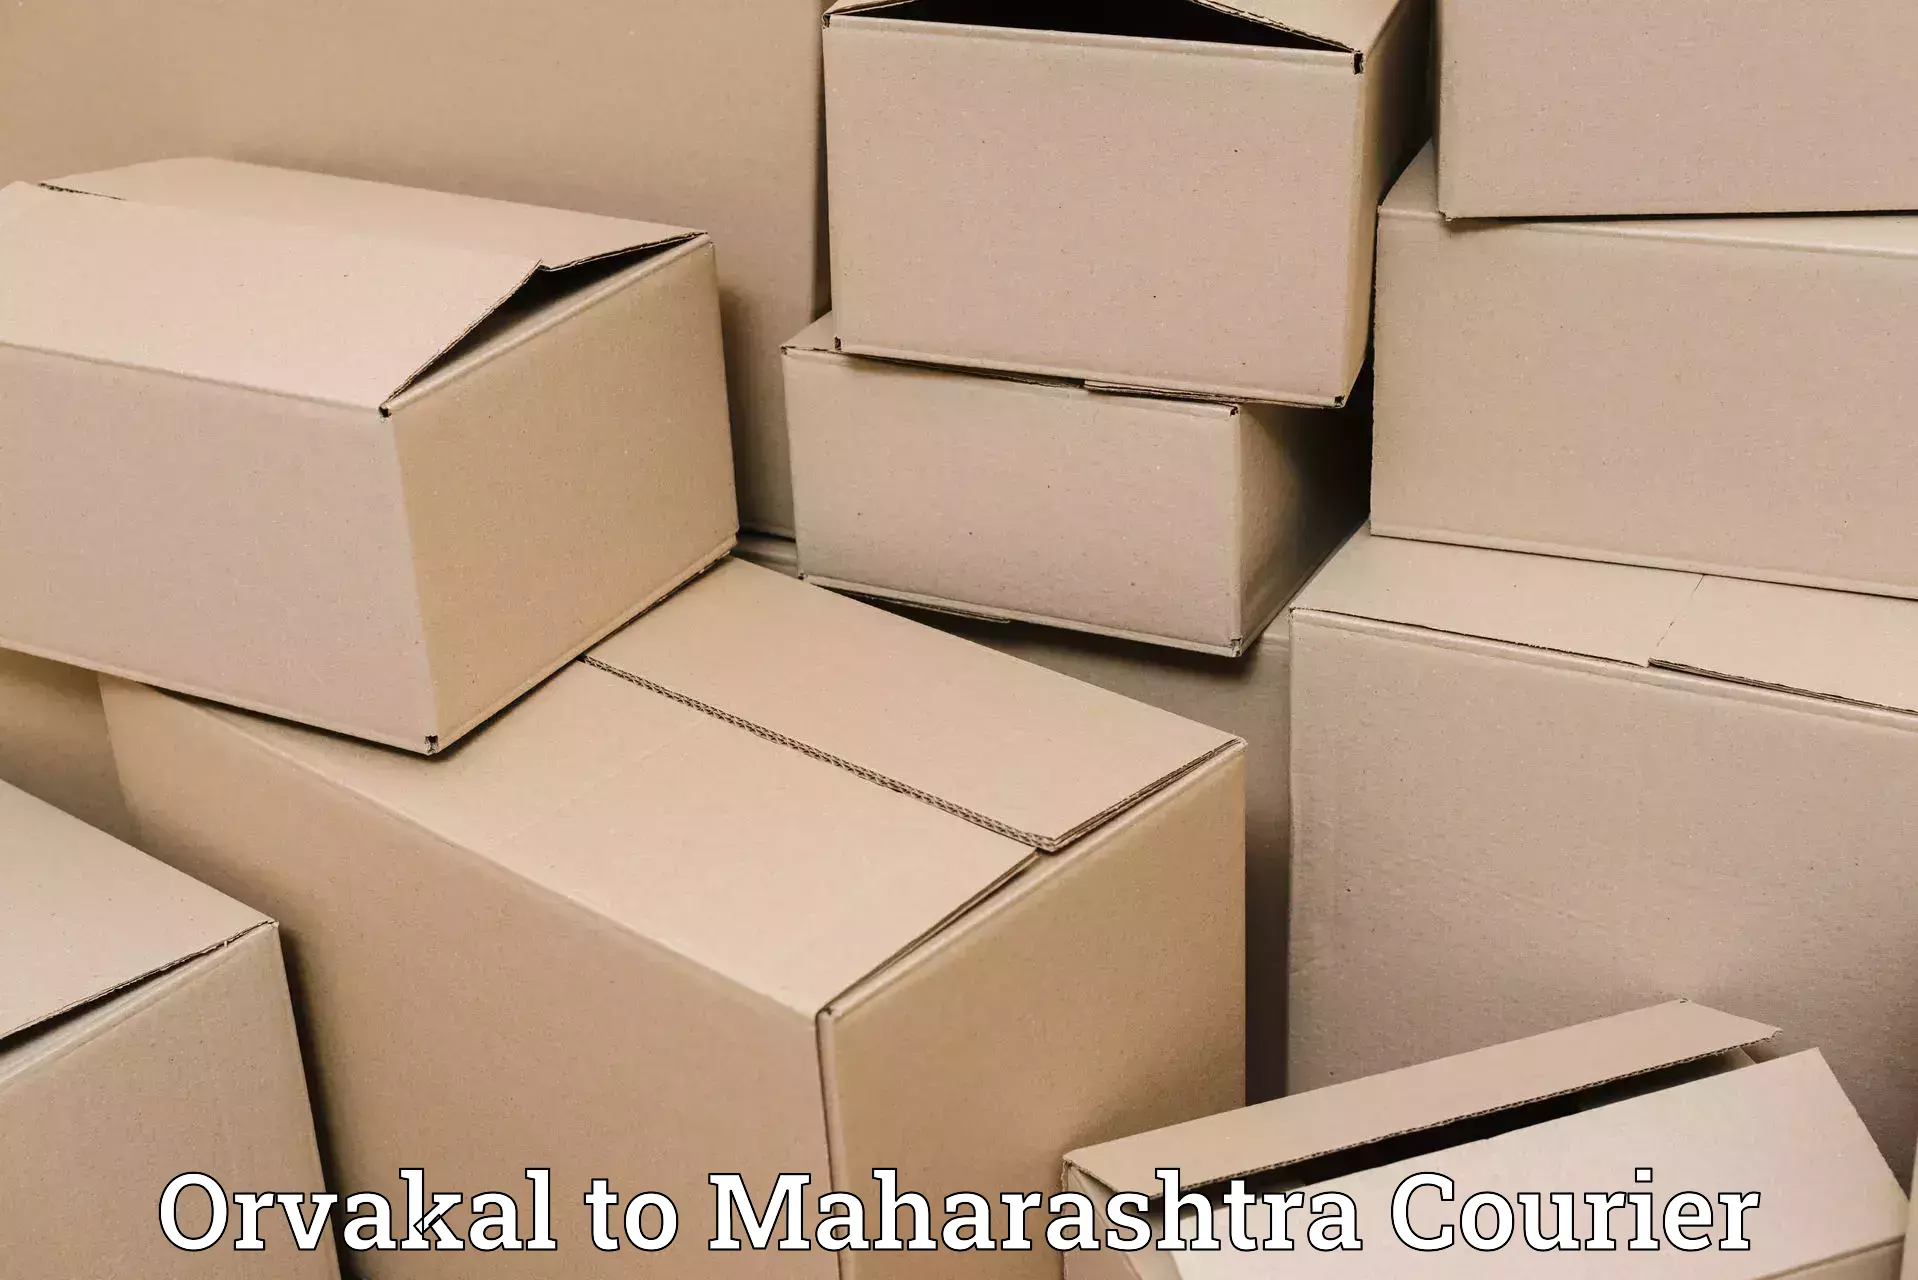 Nationwide parcel services Orvakal to Mumbai Port